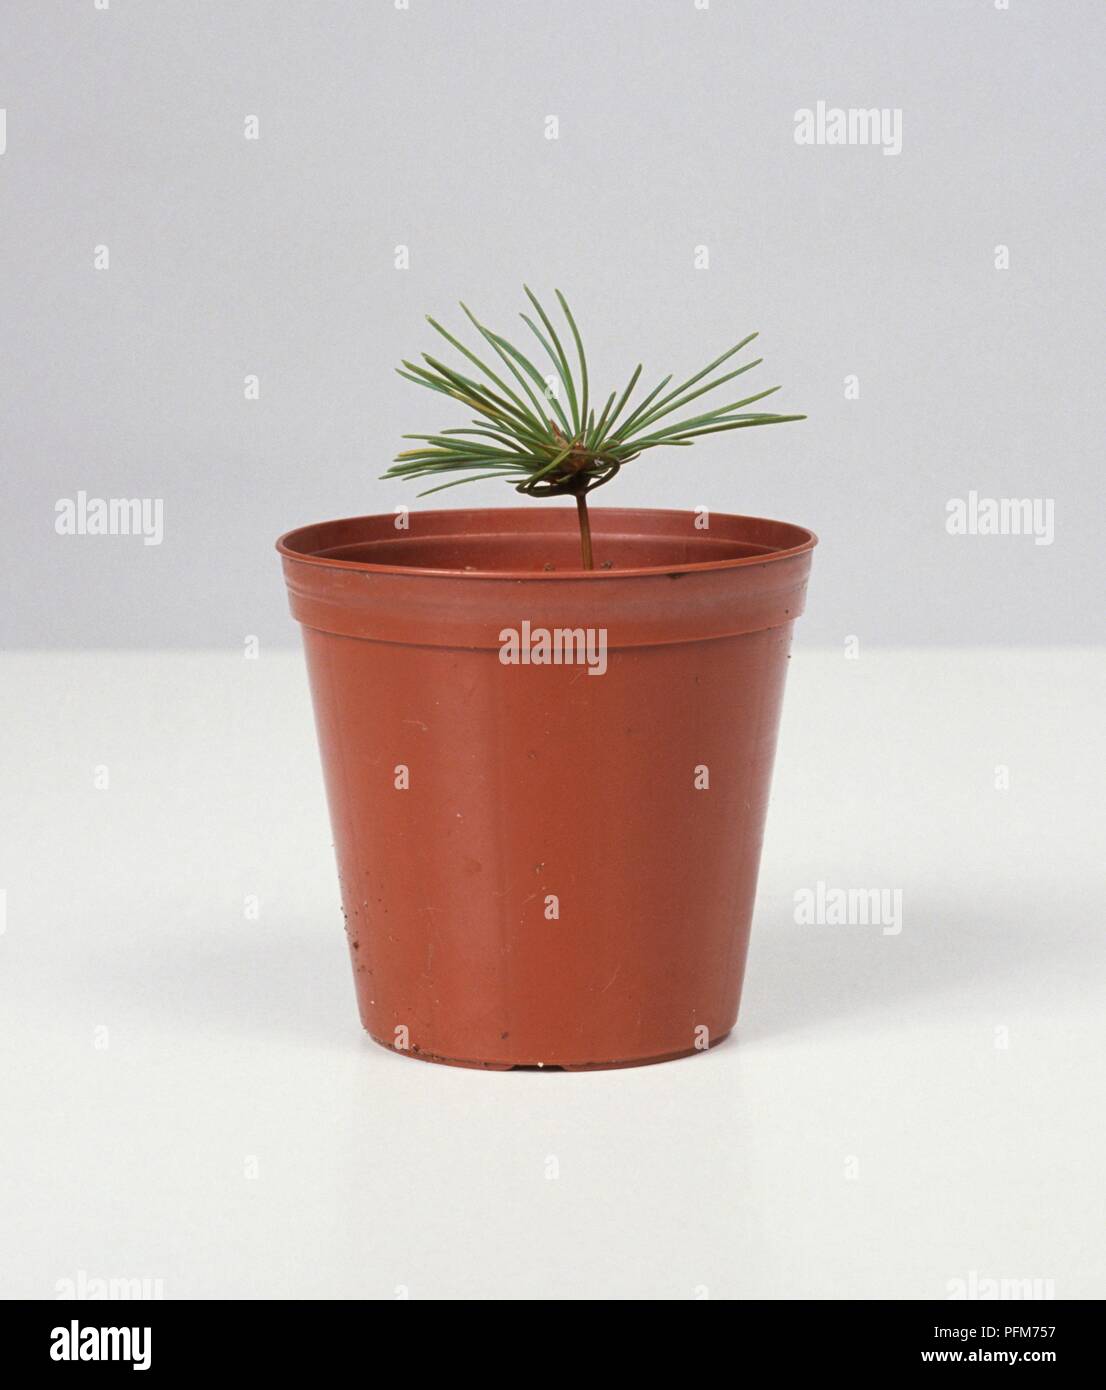 Pinus parviflora (Japanese white pine), a one-year-old bonsai tree seedling in a pot Stock Photo